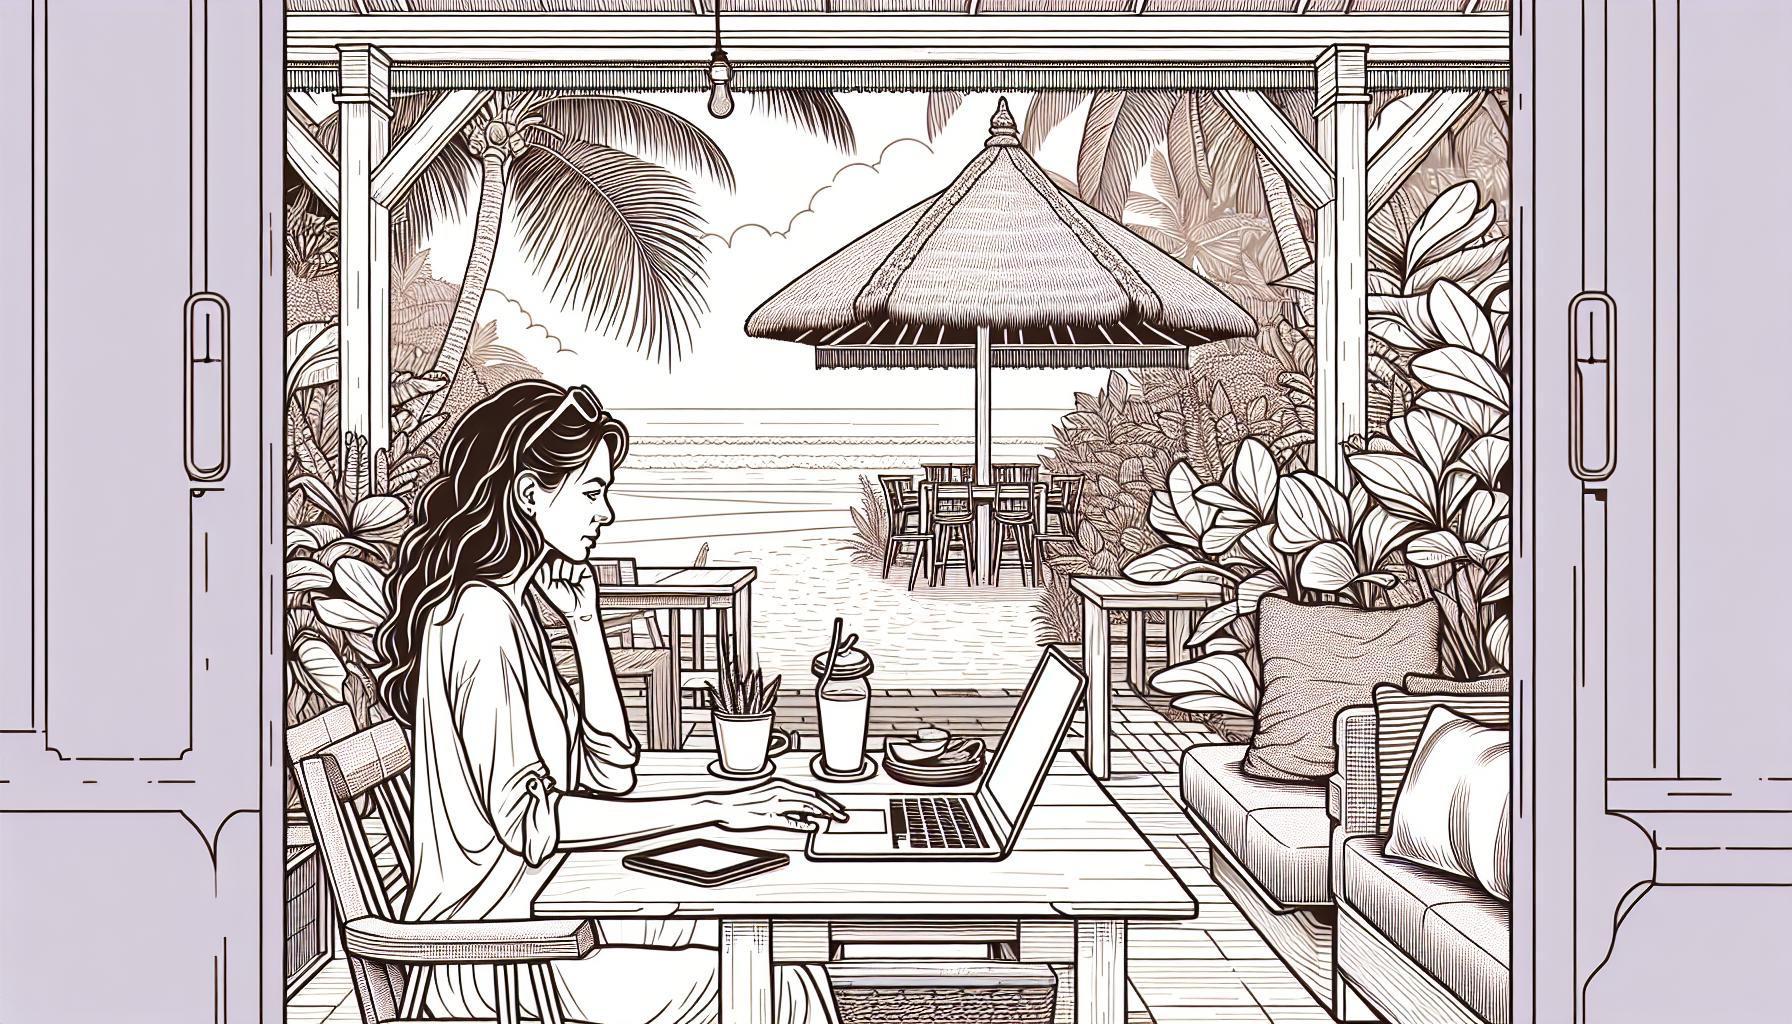 Lifestyle The Digital Nomad Community in Bali - A Comprehensive Guide ReallyRemoteWorker Explore life as a digital nomad in Bali. This article shares tips on finding suitable accommodation, networking opportunities, and overcoming challenges like language barriers, and visa restrictions. Preparedness and adaptability can make your stay rewarding and exciting.